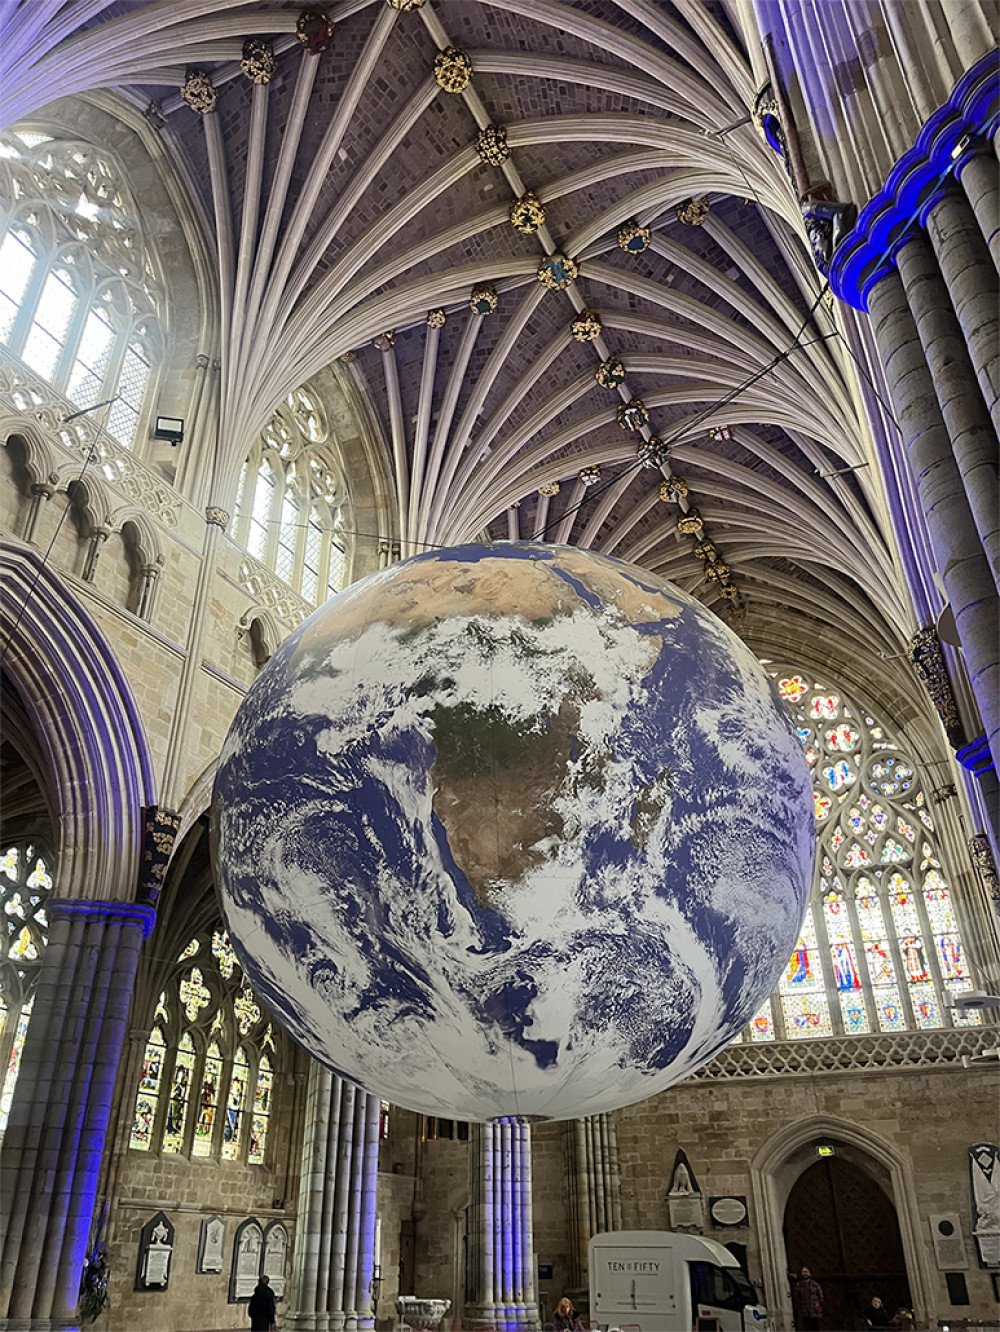  Luke Jerram’s new Gaia exhibition at Exeter Cathedral